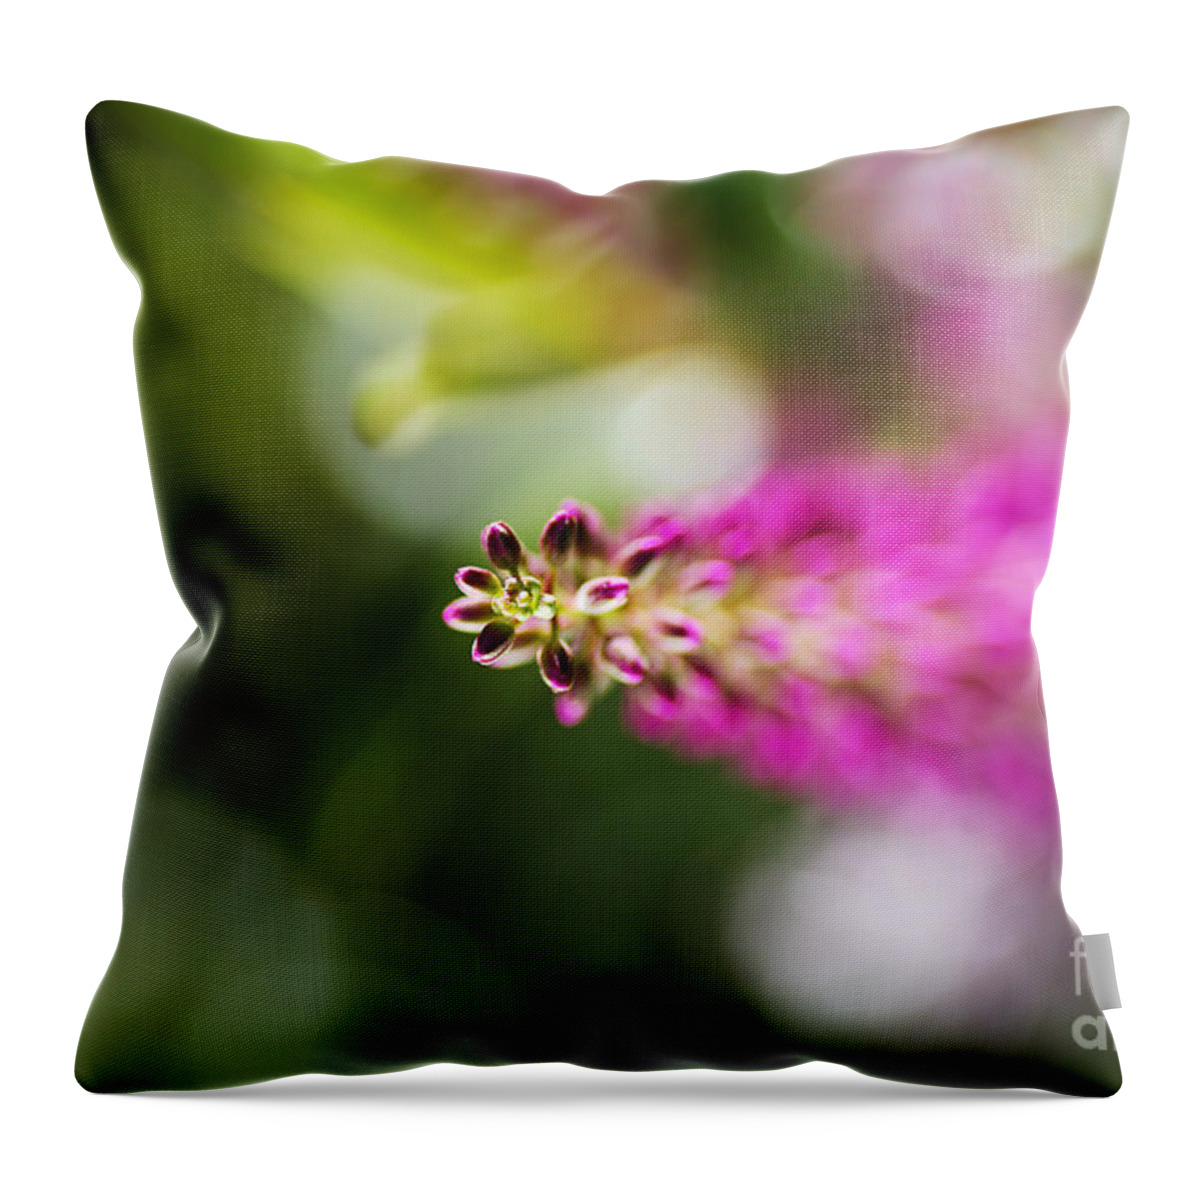 Hebe Painted Nature Throw Pillow featuring the photograph Hebe Painted Nature by Joy Watson